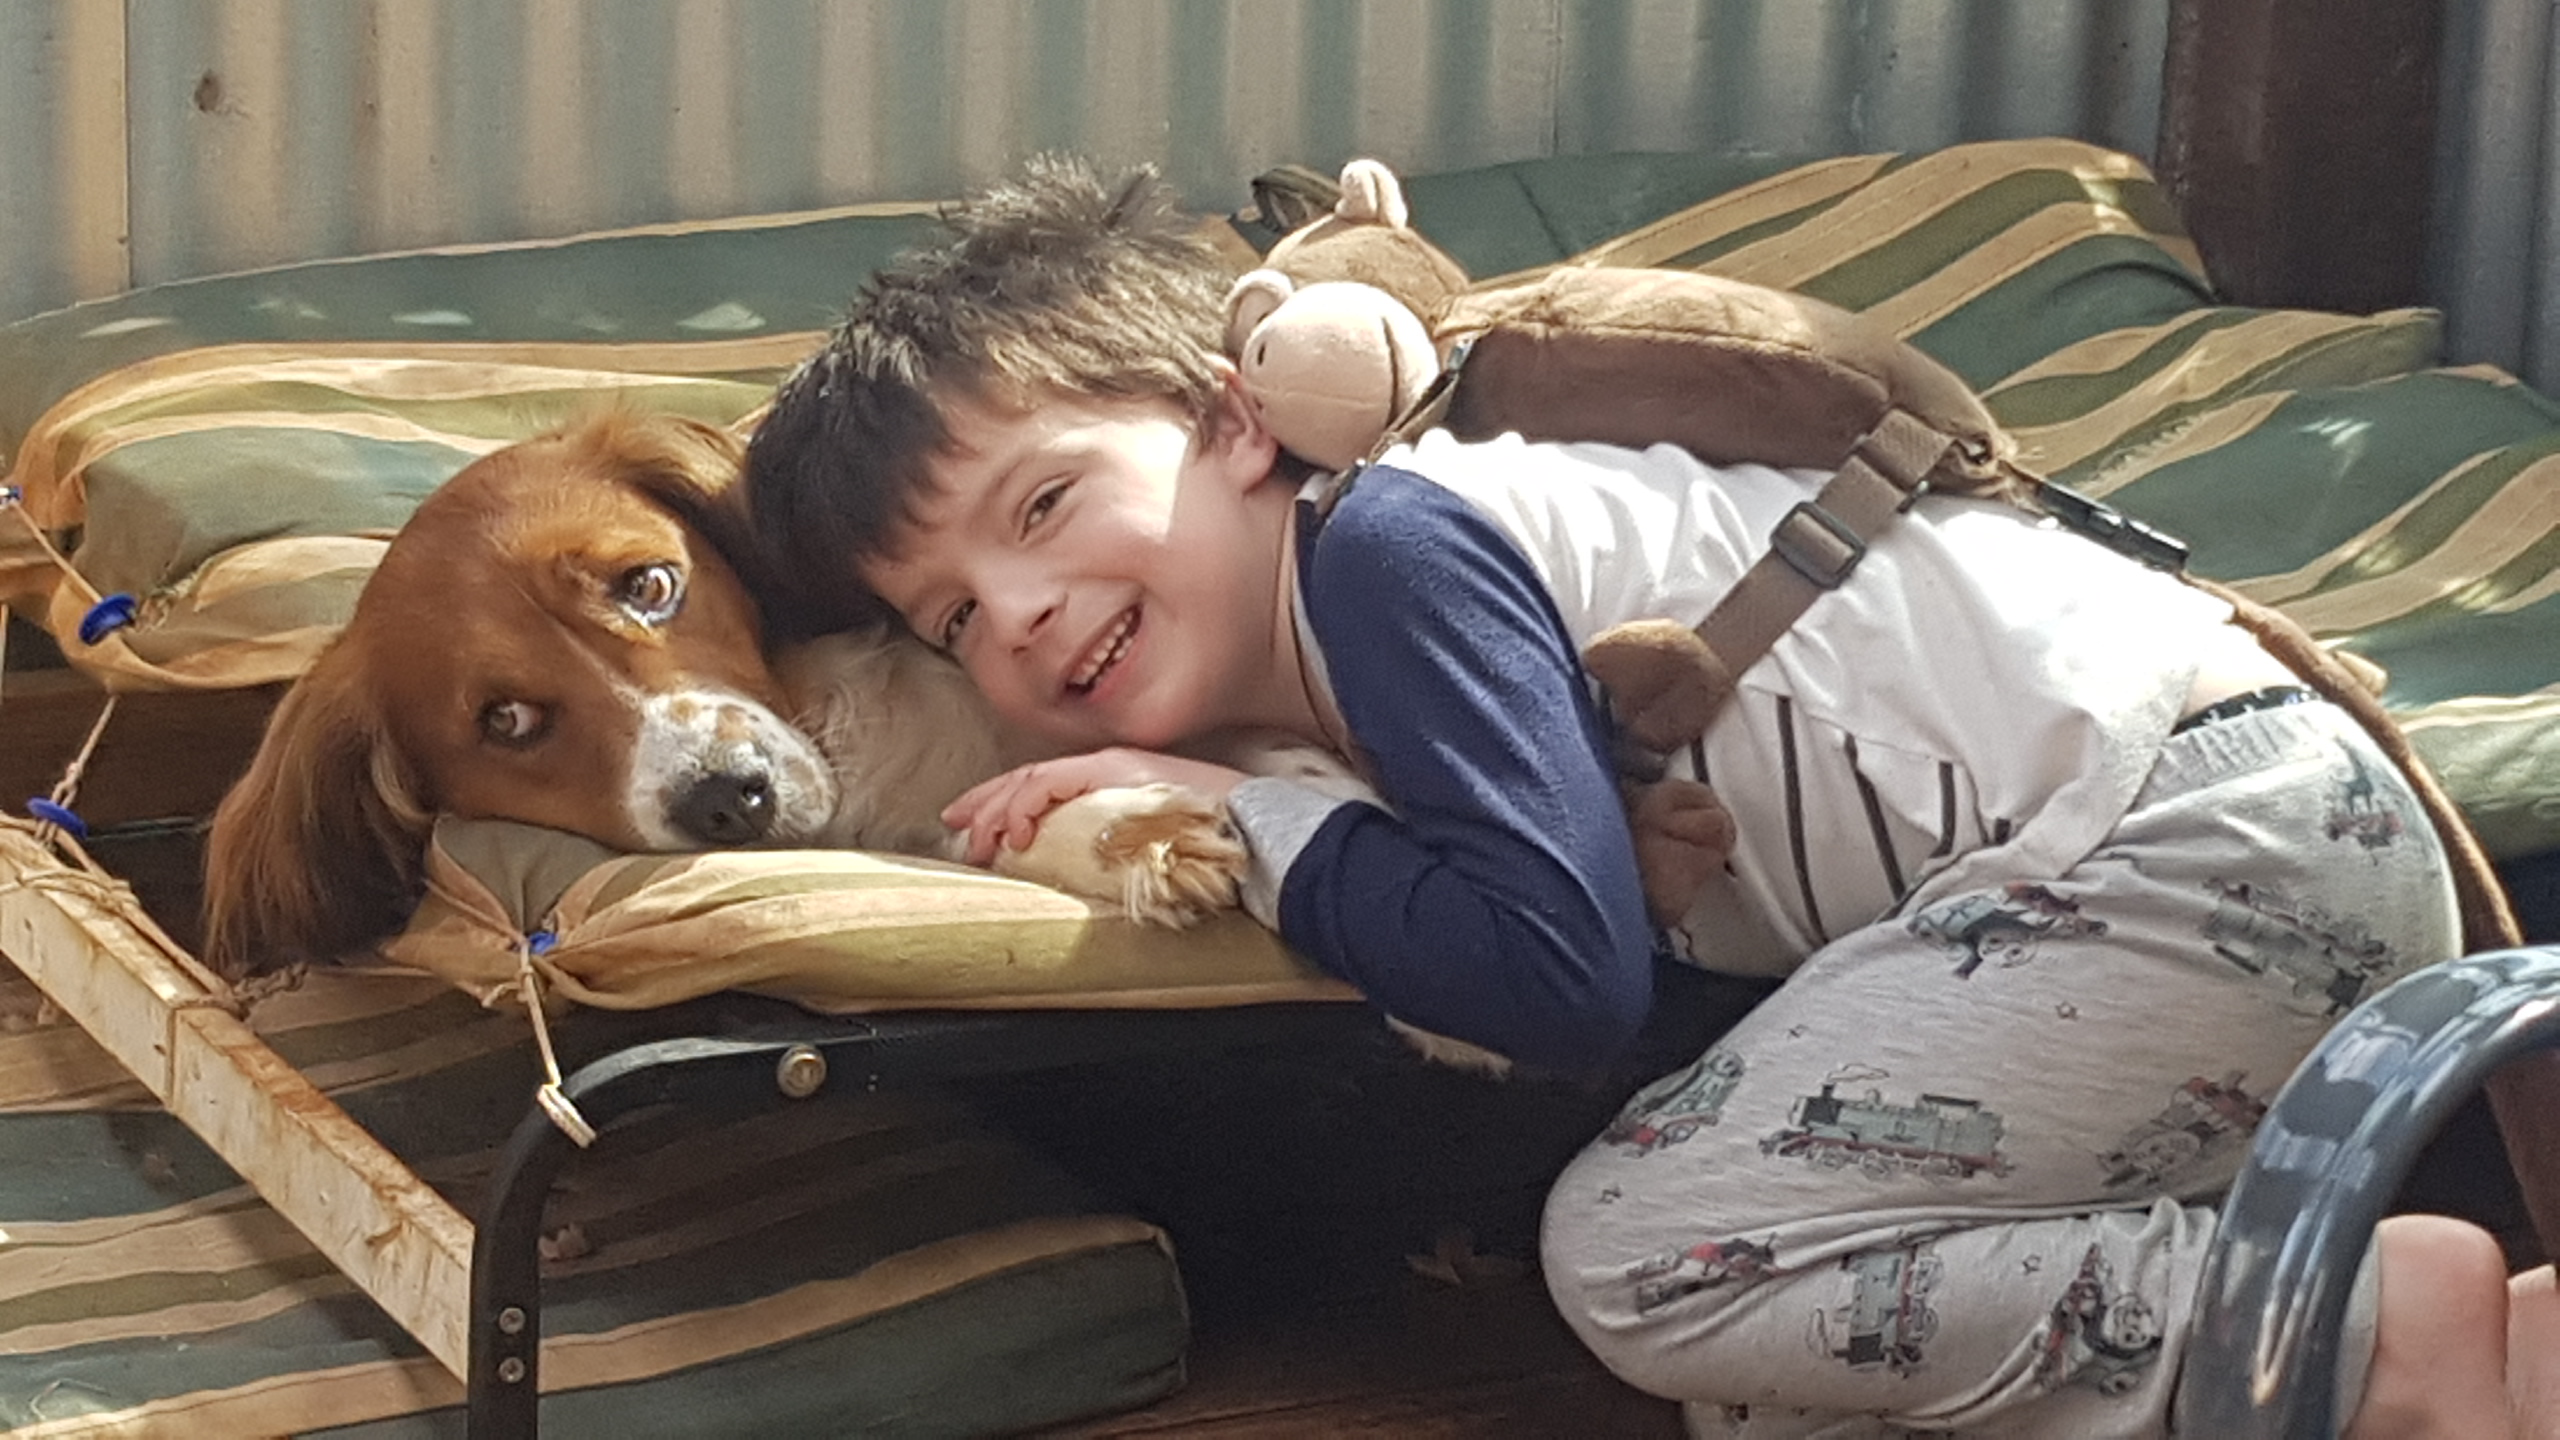 Little boy smiling, and laying next to a pet dog